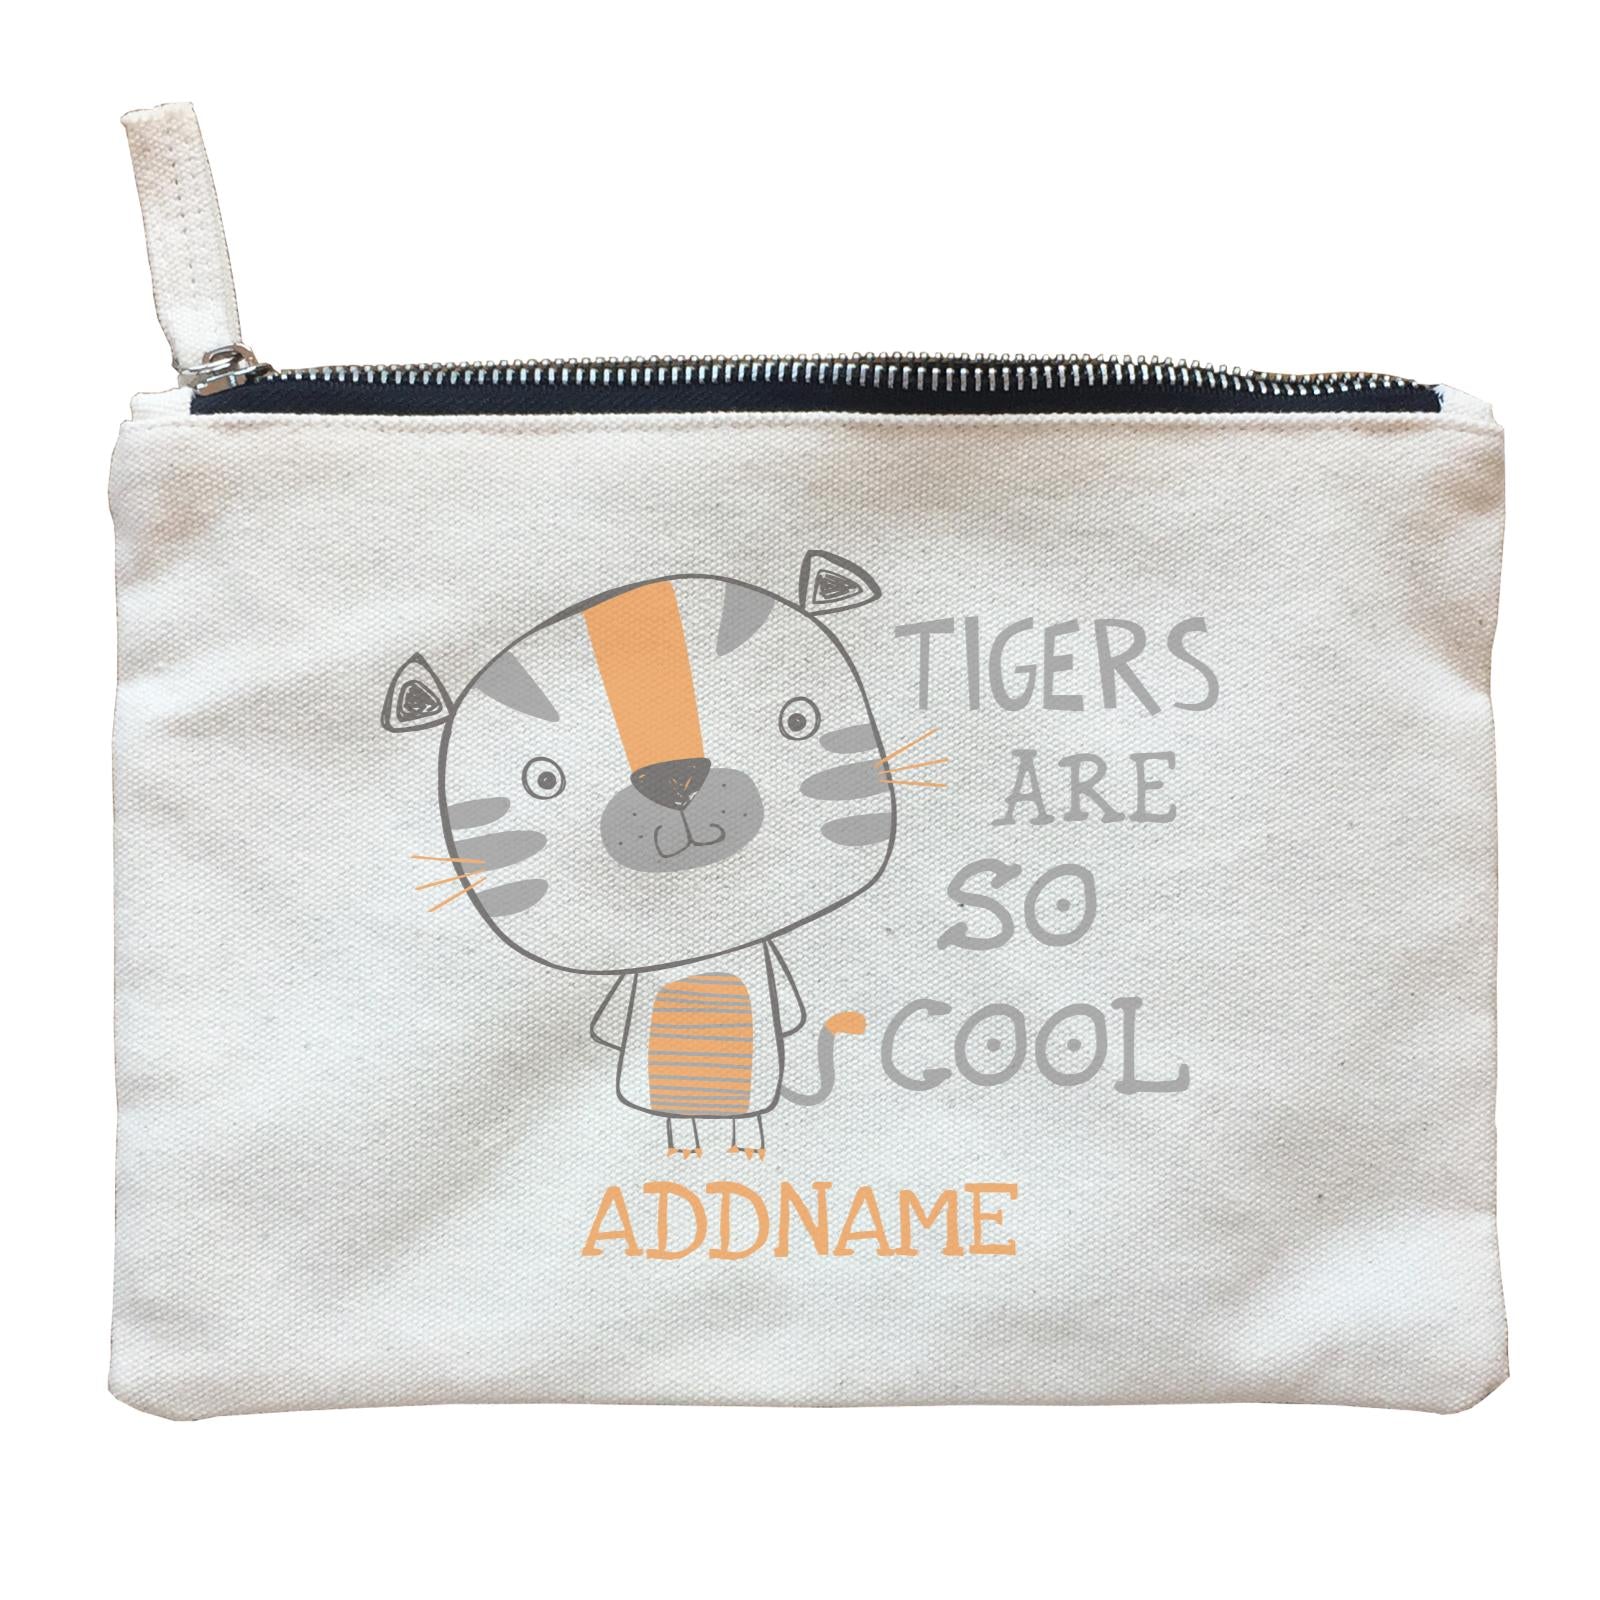 Tigers Are So Cool Addname Zipper Pouch